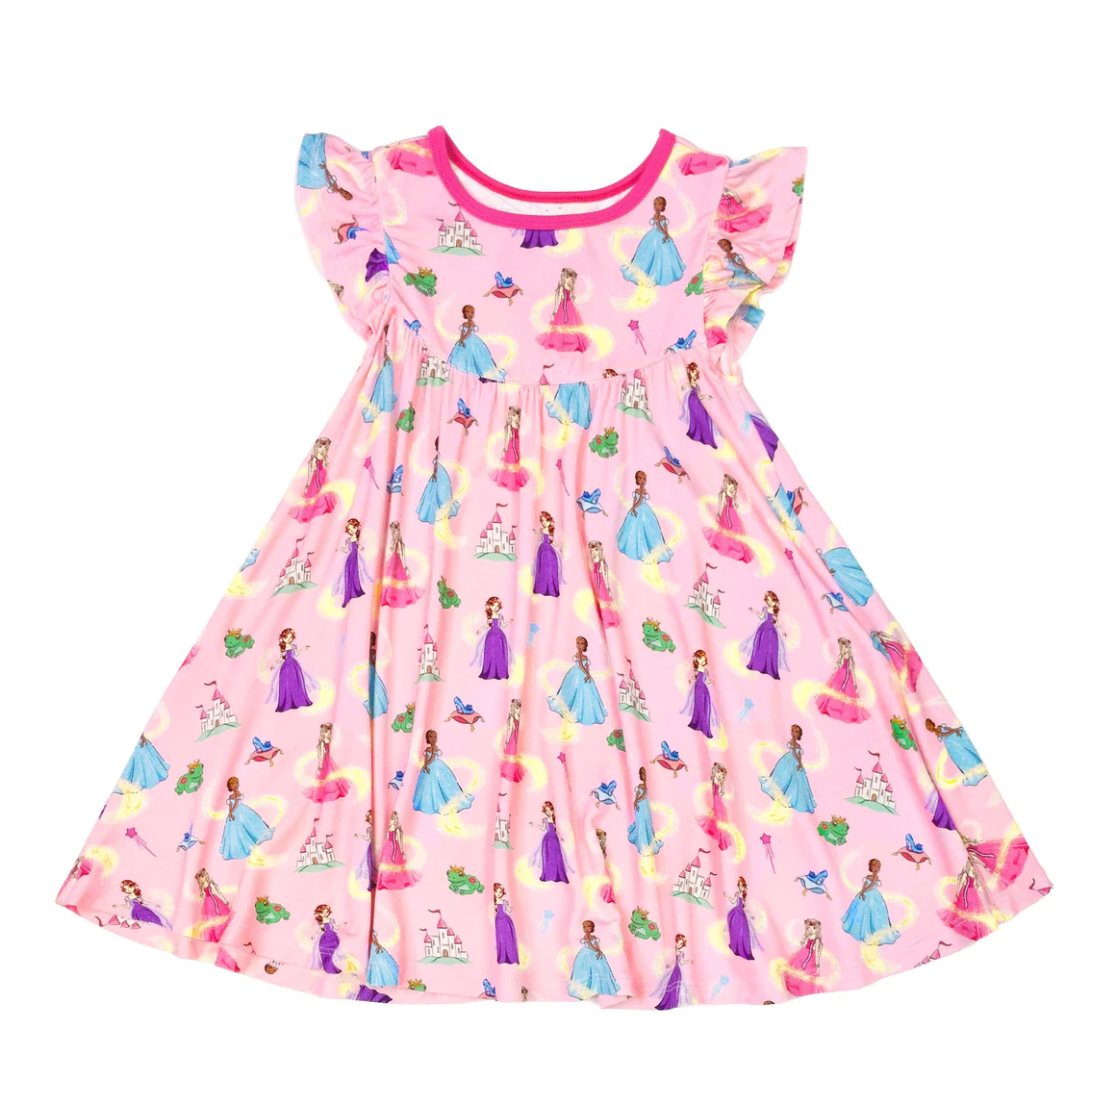 MAKE YOUR OWN MAGIC PRINCESSES TWIRLING DRESS